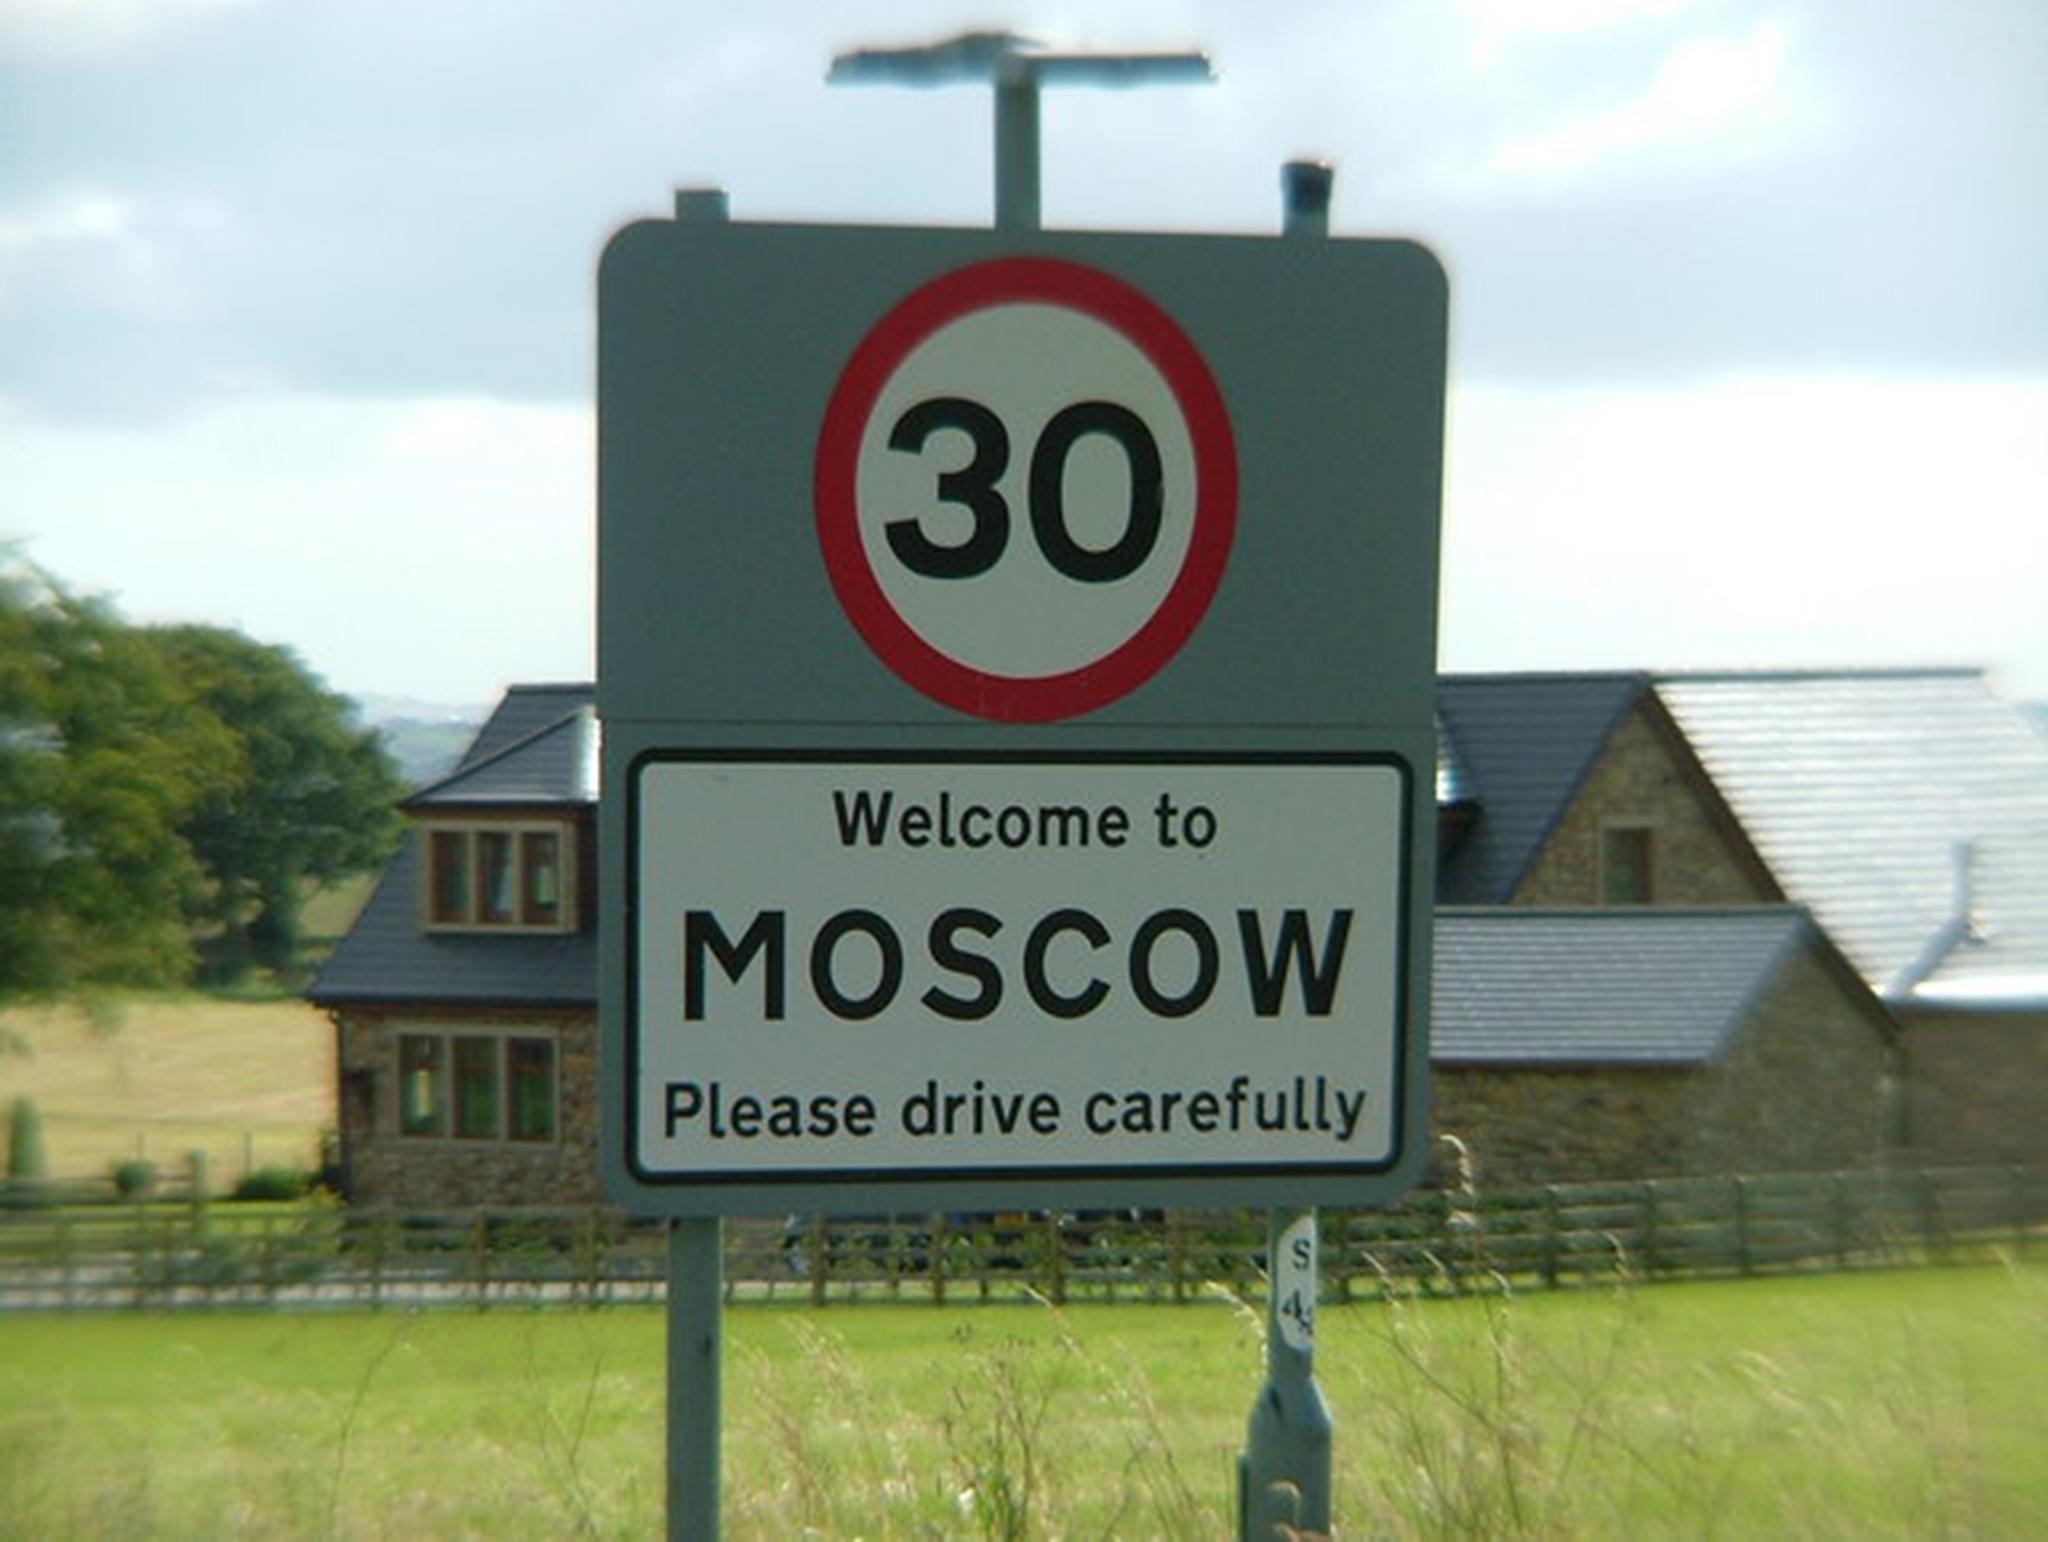 ‘Oh! Ye’ll take the high road and I’ll take the low road, and I’ll be in Moscow, East Ayrshire, afore ye’